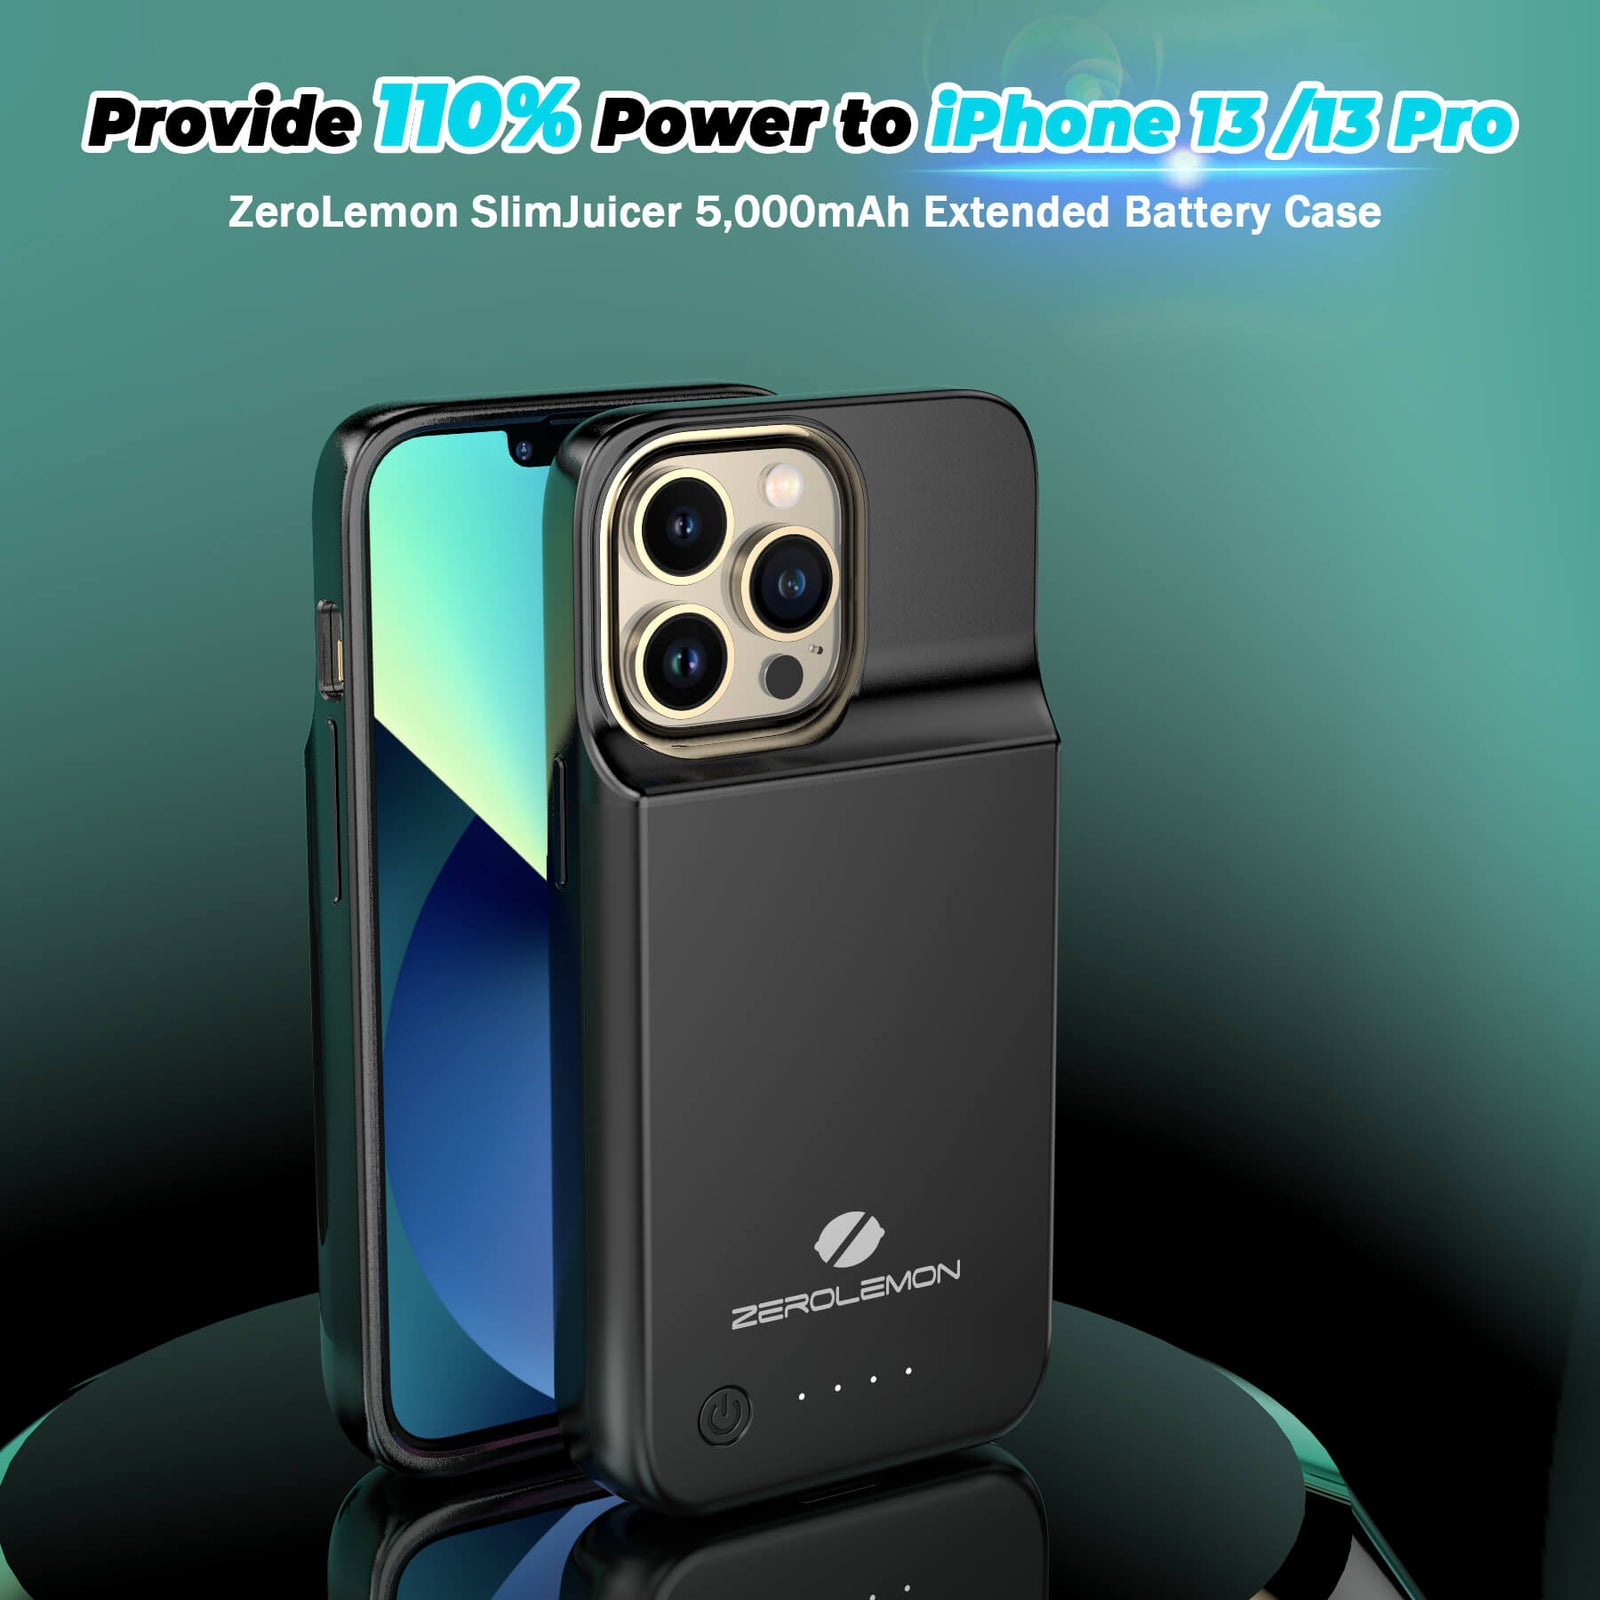 iPhone 13/13 Pro battery case, iPhone 13/13 Pro extended battery case, iPhone 13/13 Pro charging case, iPhone 13/13 Pro battery charger, TPU case, wireless charging, Apple, black